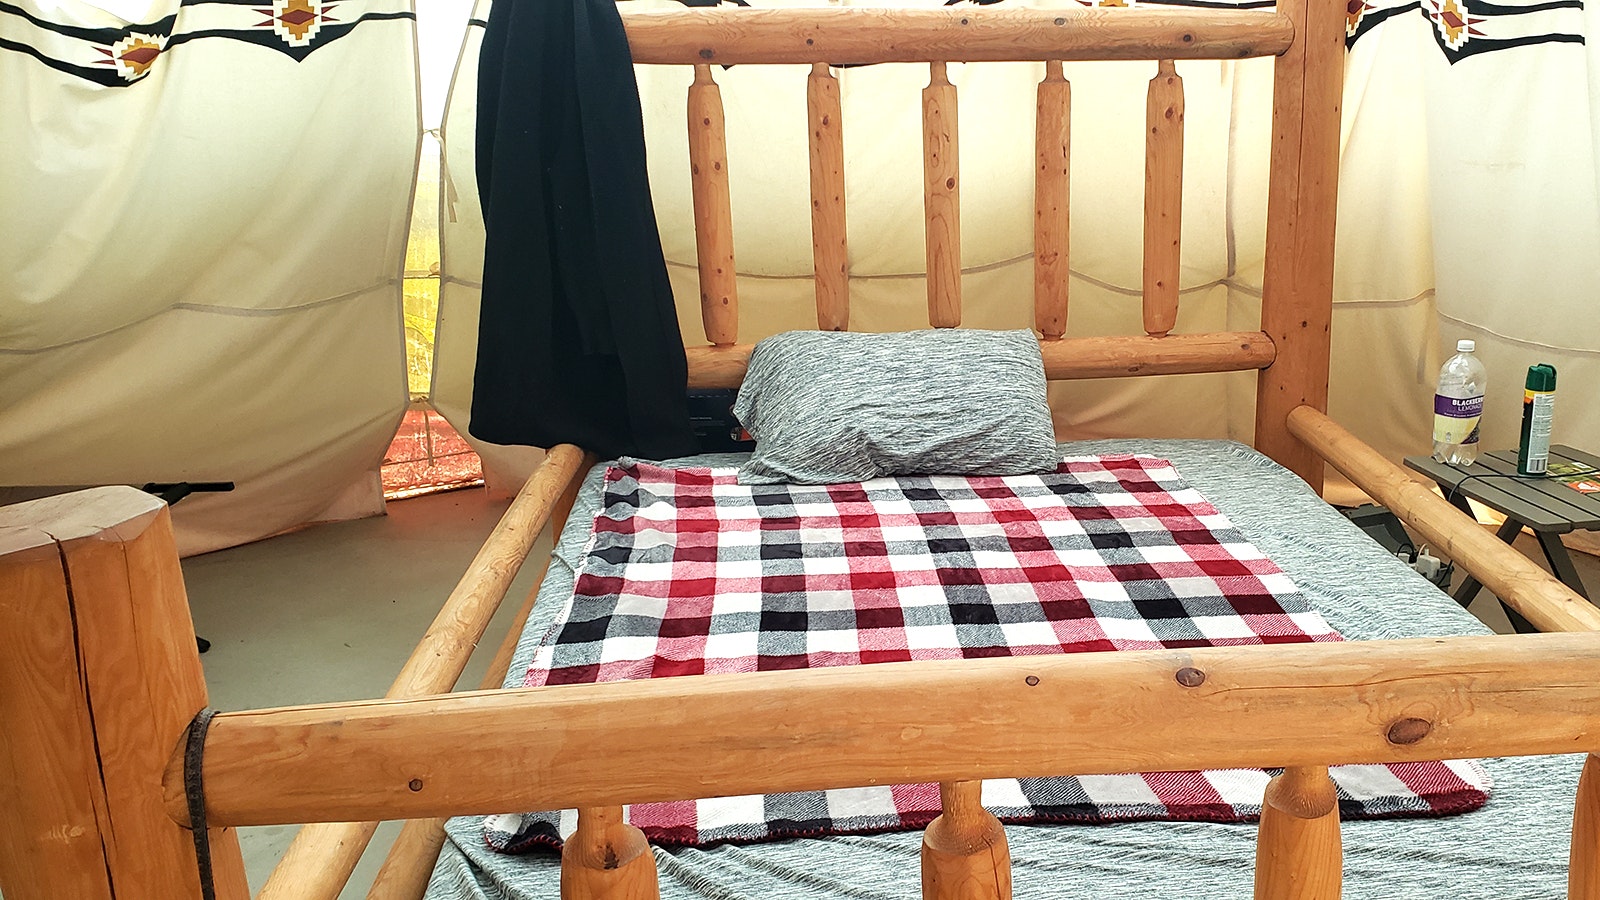 The teepees at the Devils Tower KOA come with beds, but campers must bring their own linens and anything else they want, like the small foldable table to the right of the bed.